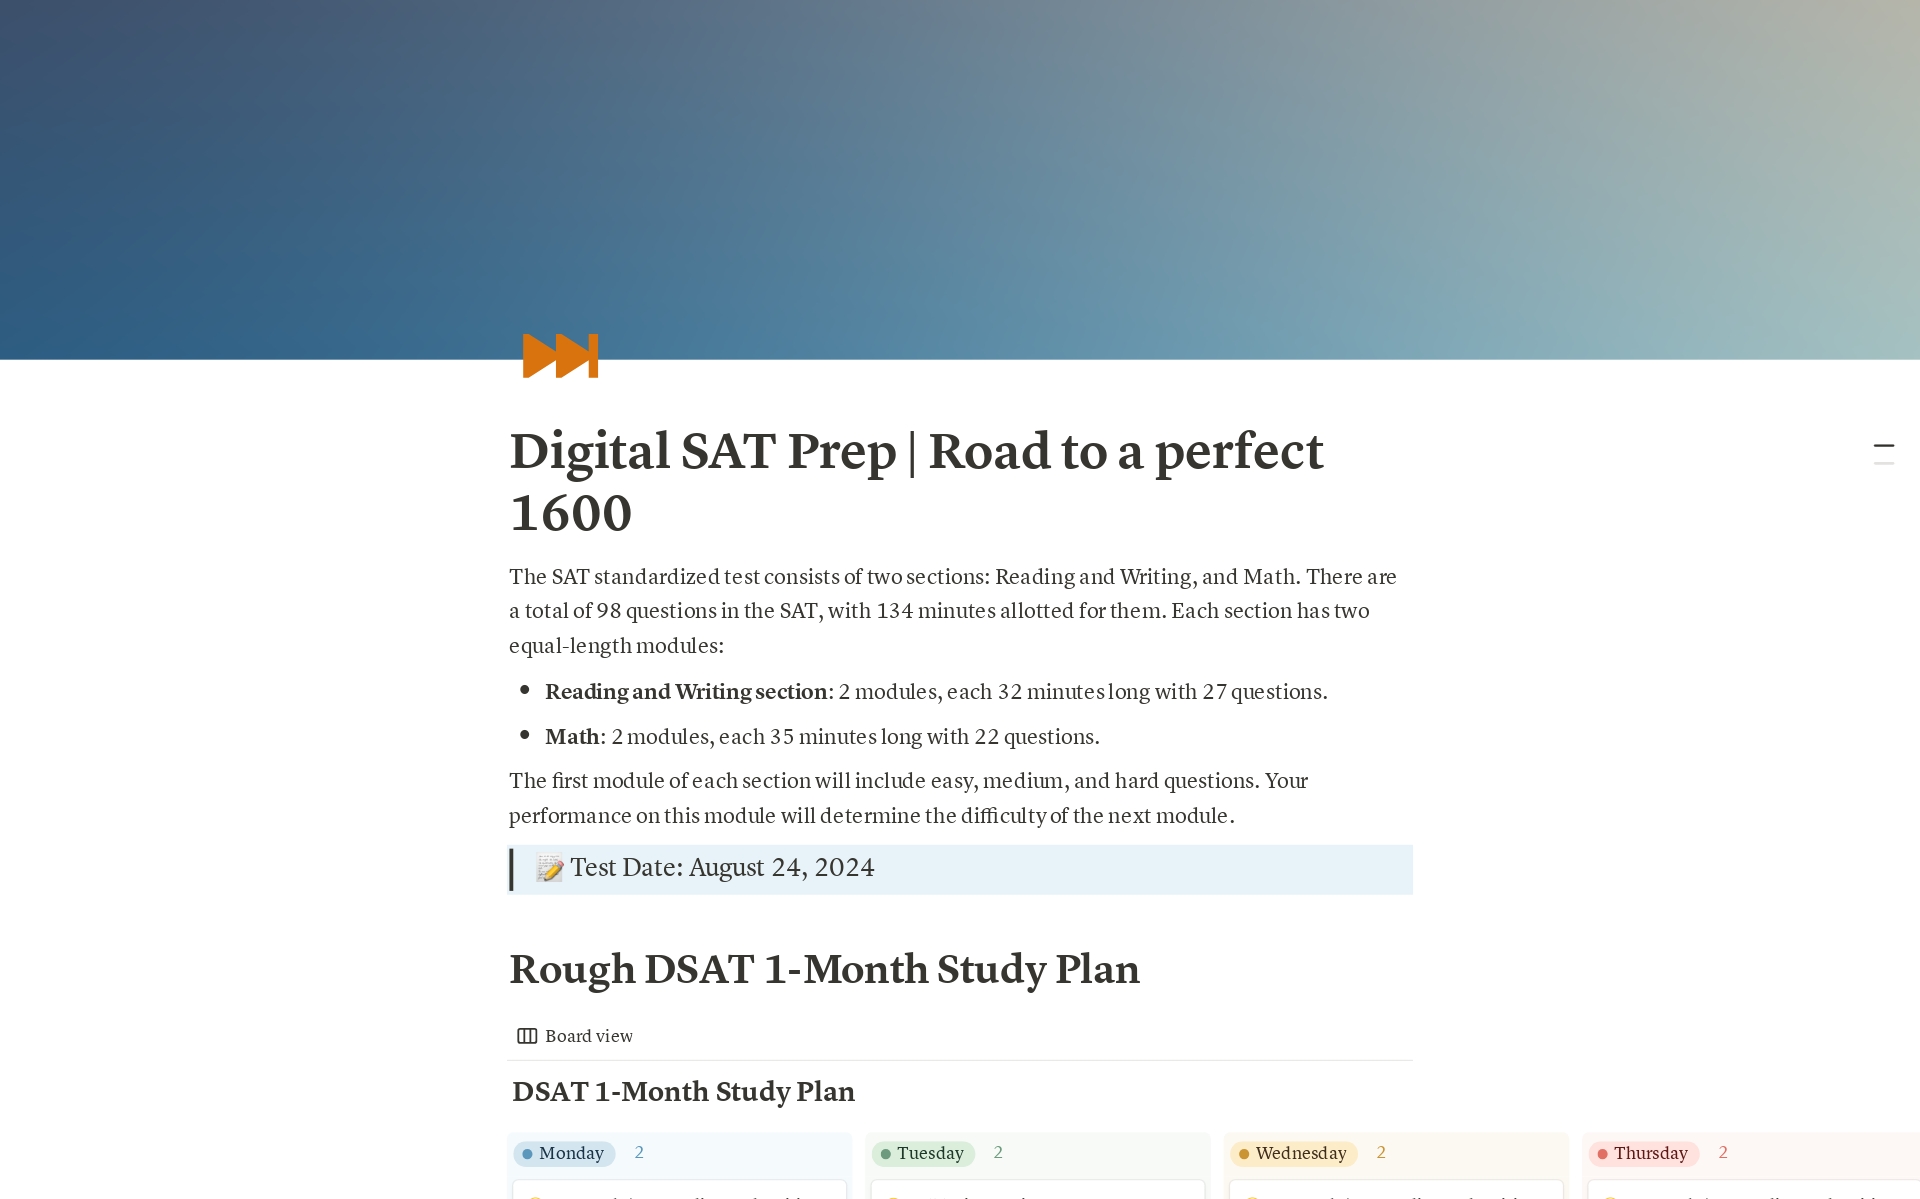 This template is made for students who are willing to take the time to embed a study schedule for prepping for an upcoming DSAT. There are many ways to make your schedule interesting and organized, and I hope this template helps you achieve this. 